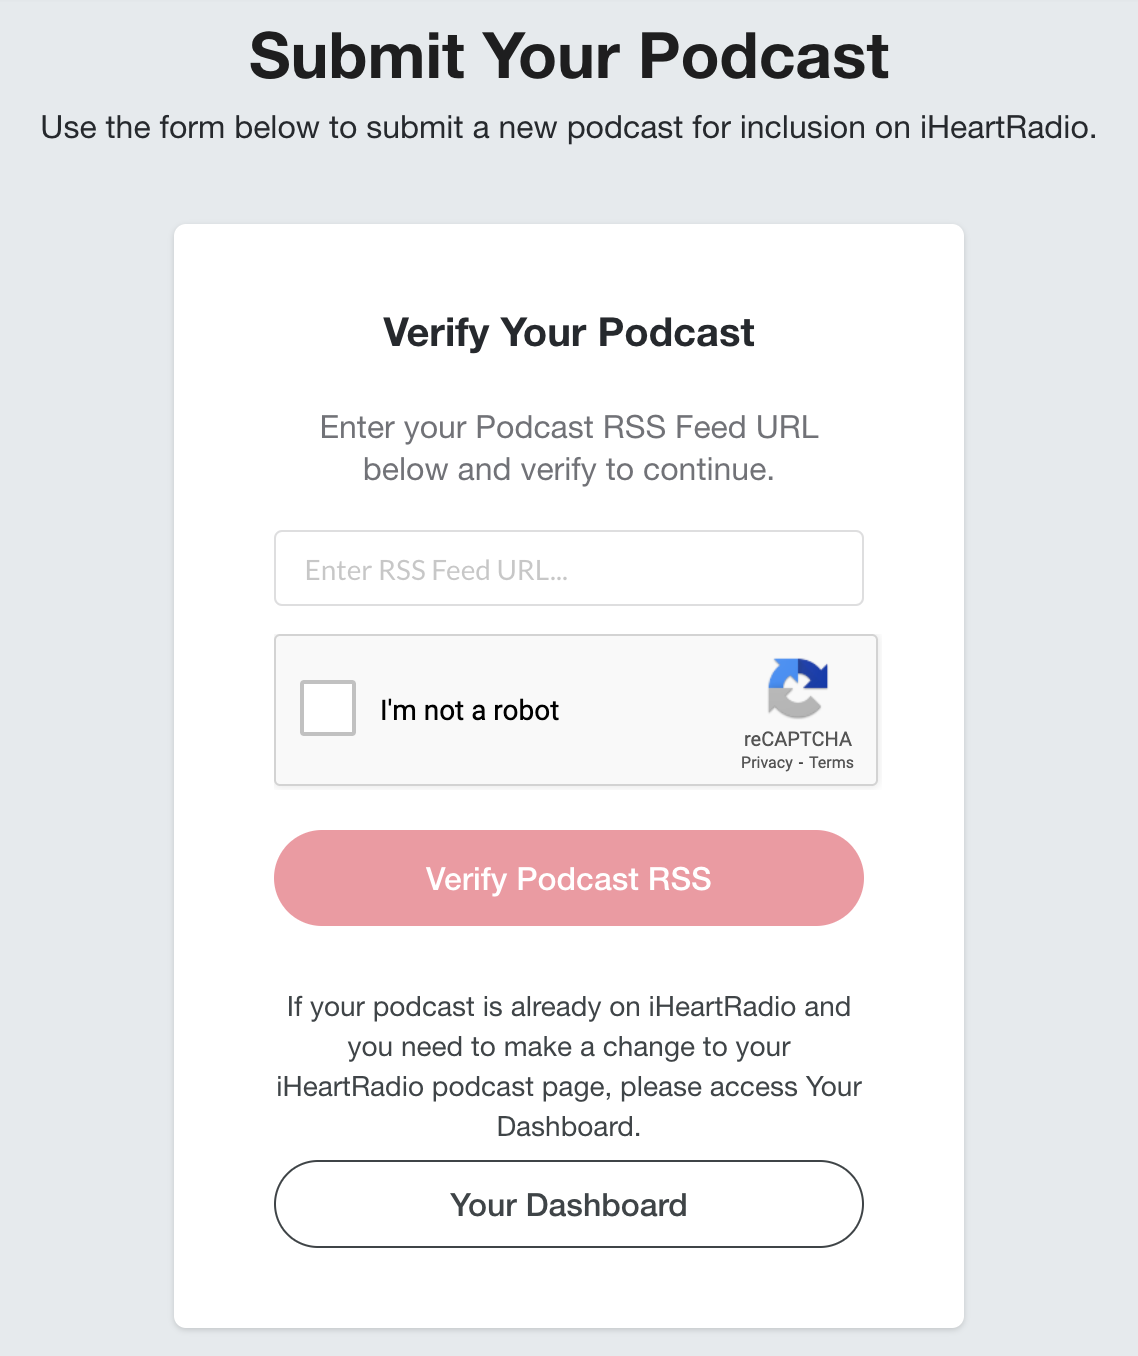 submitting your podcast on iHeartRadio